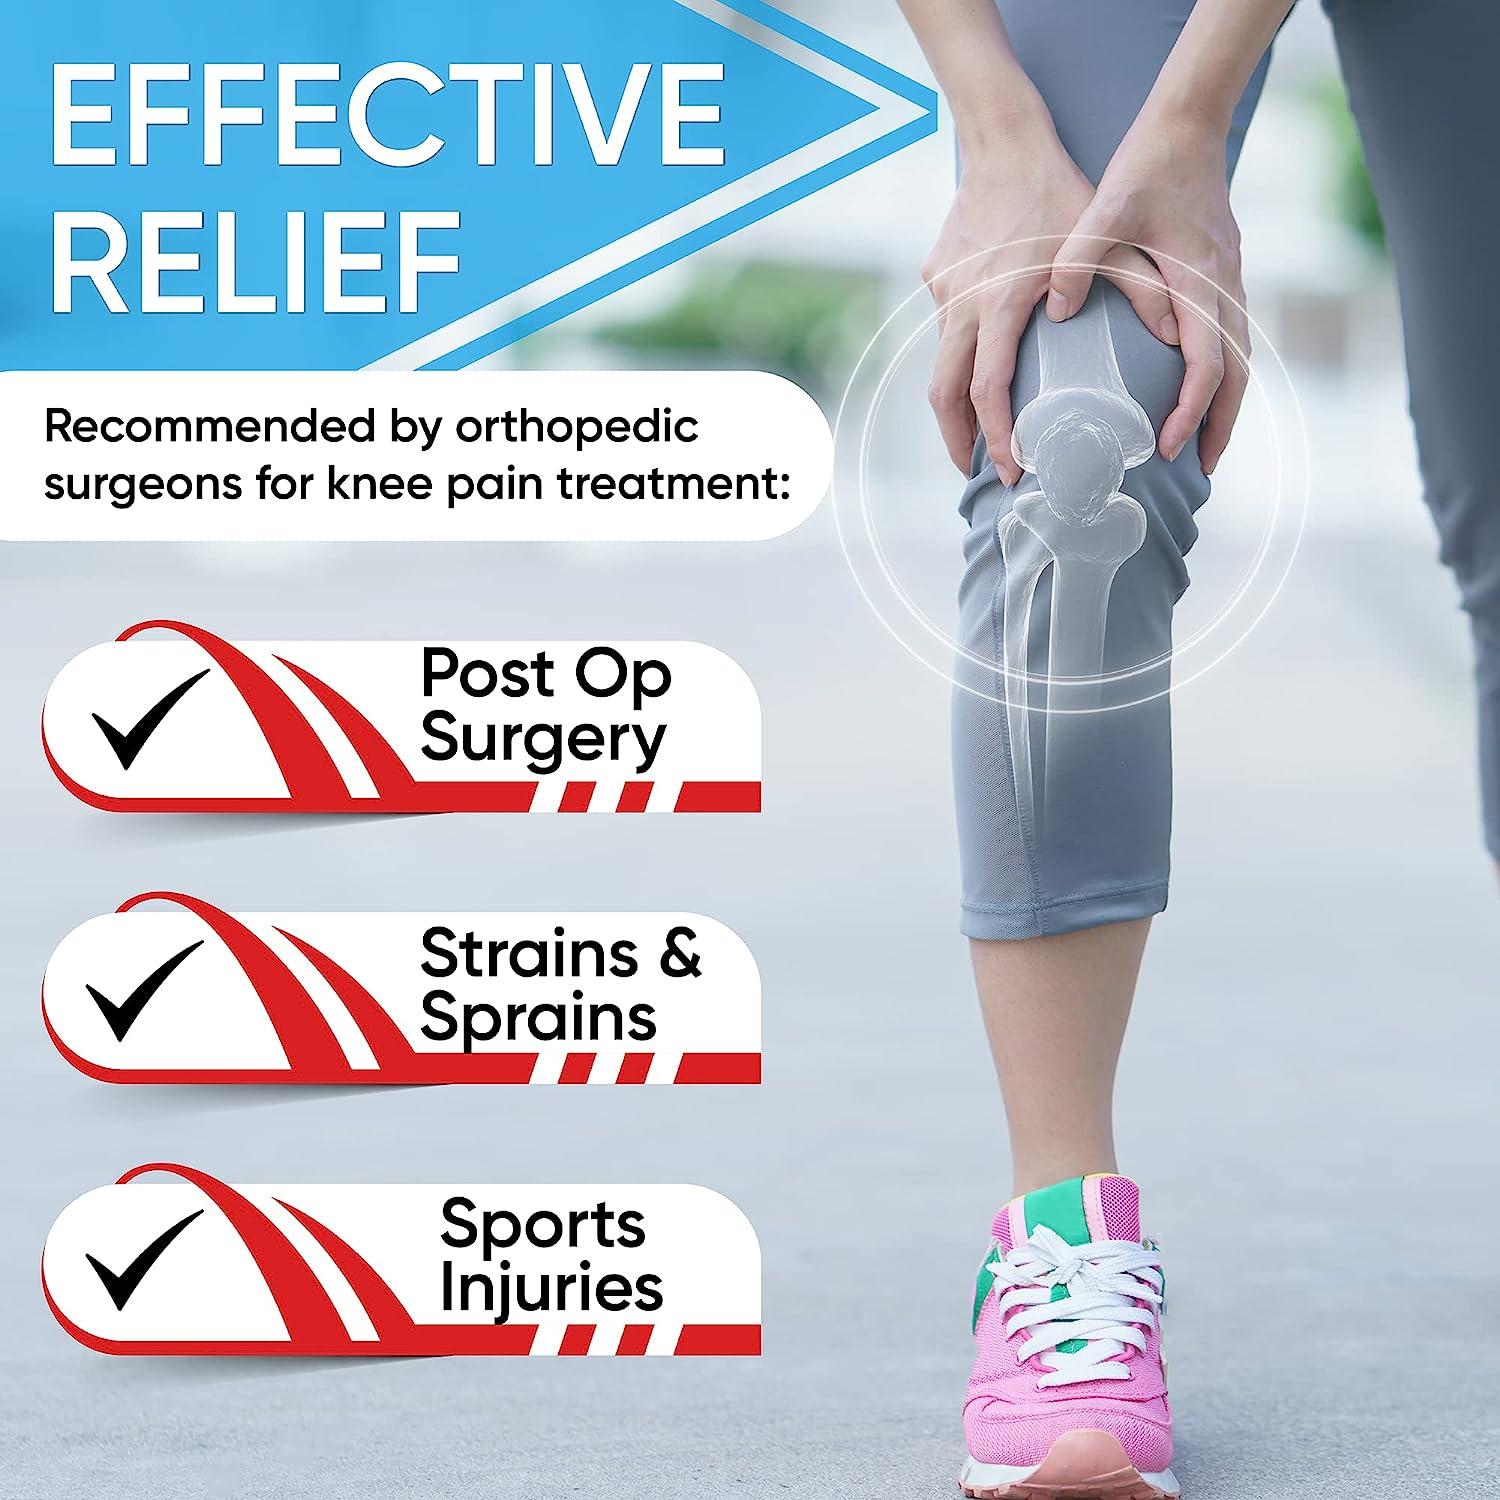 FSA approved therapies and orthopedic products